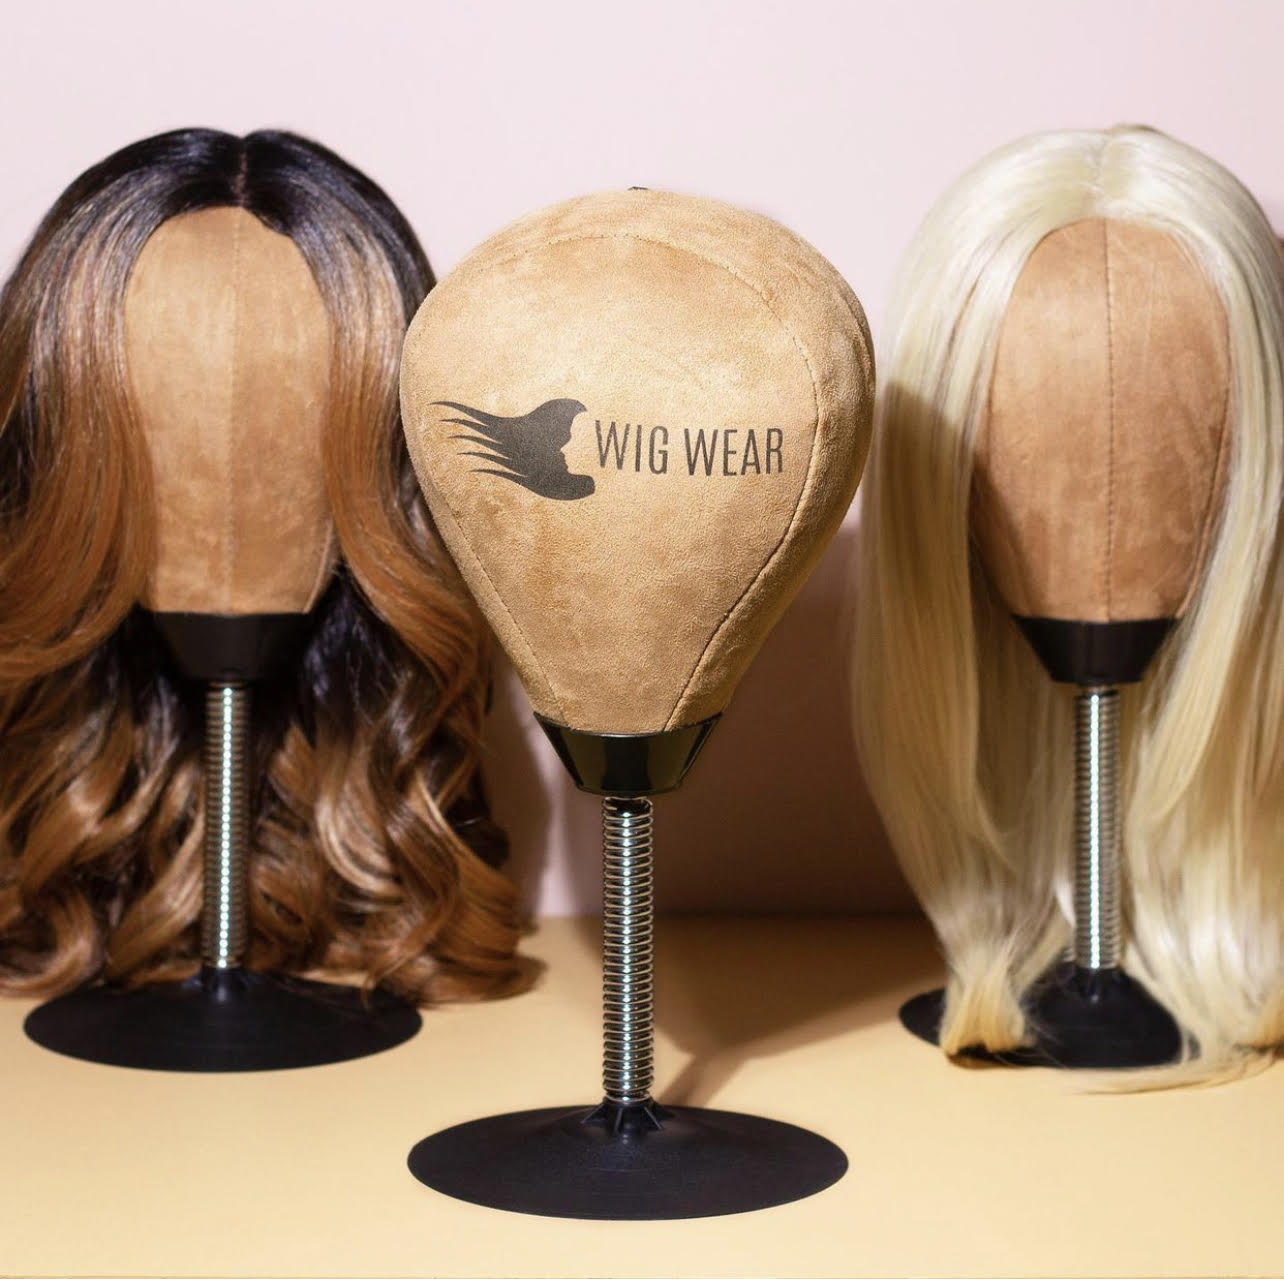 Wig Wear is A Game Changer!